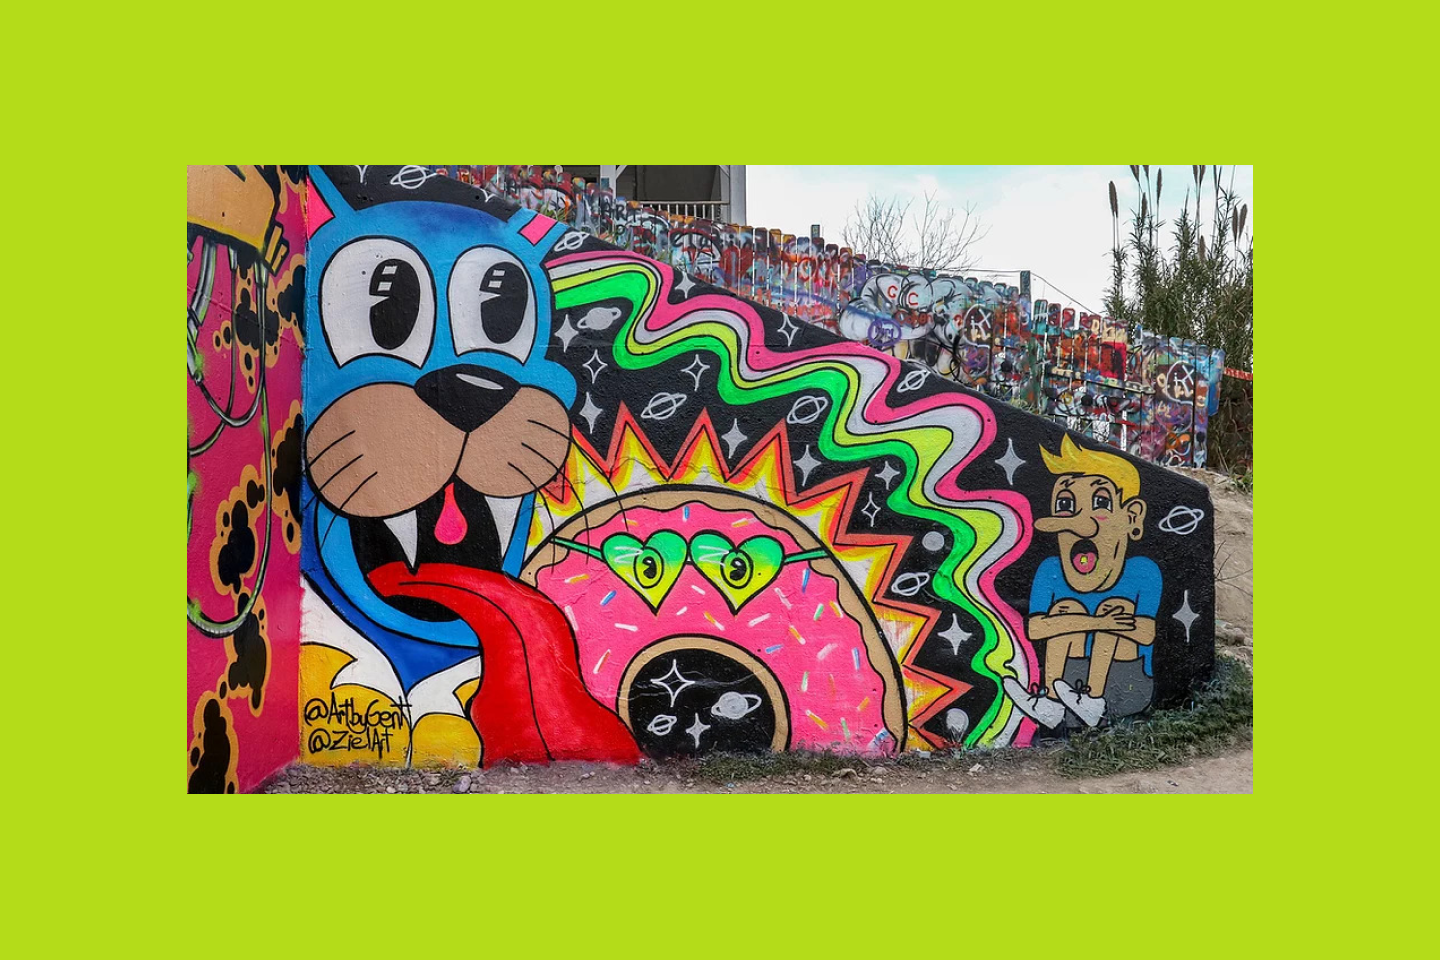 graffiti art wall with neon cat, doughnut and person